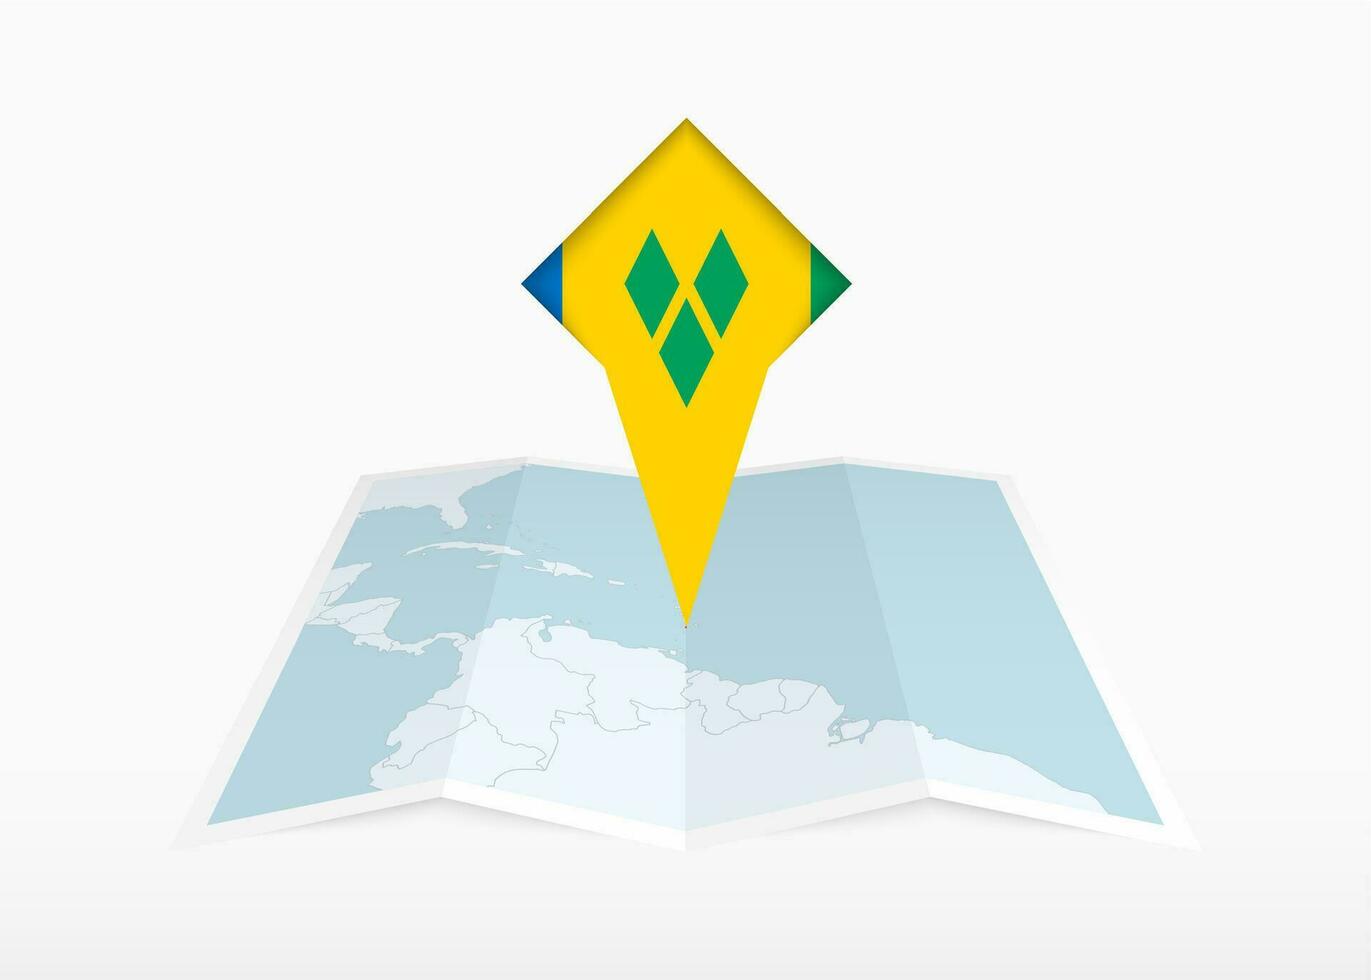 Saint Vincent and the Grenadines is depicted on a folded paper map and pinned location marker with flag of Saint Vincent and the Grenadines. vector